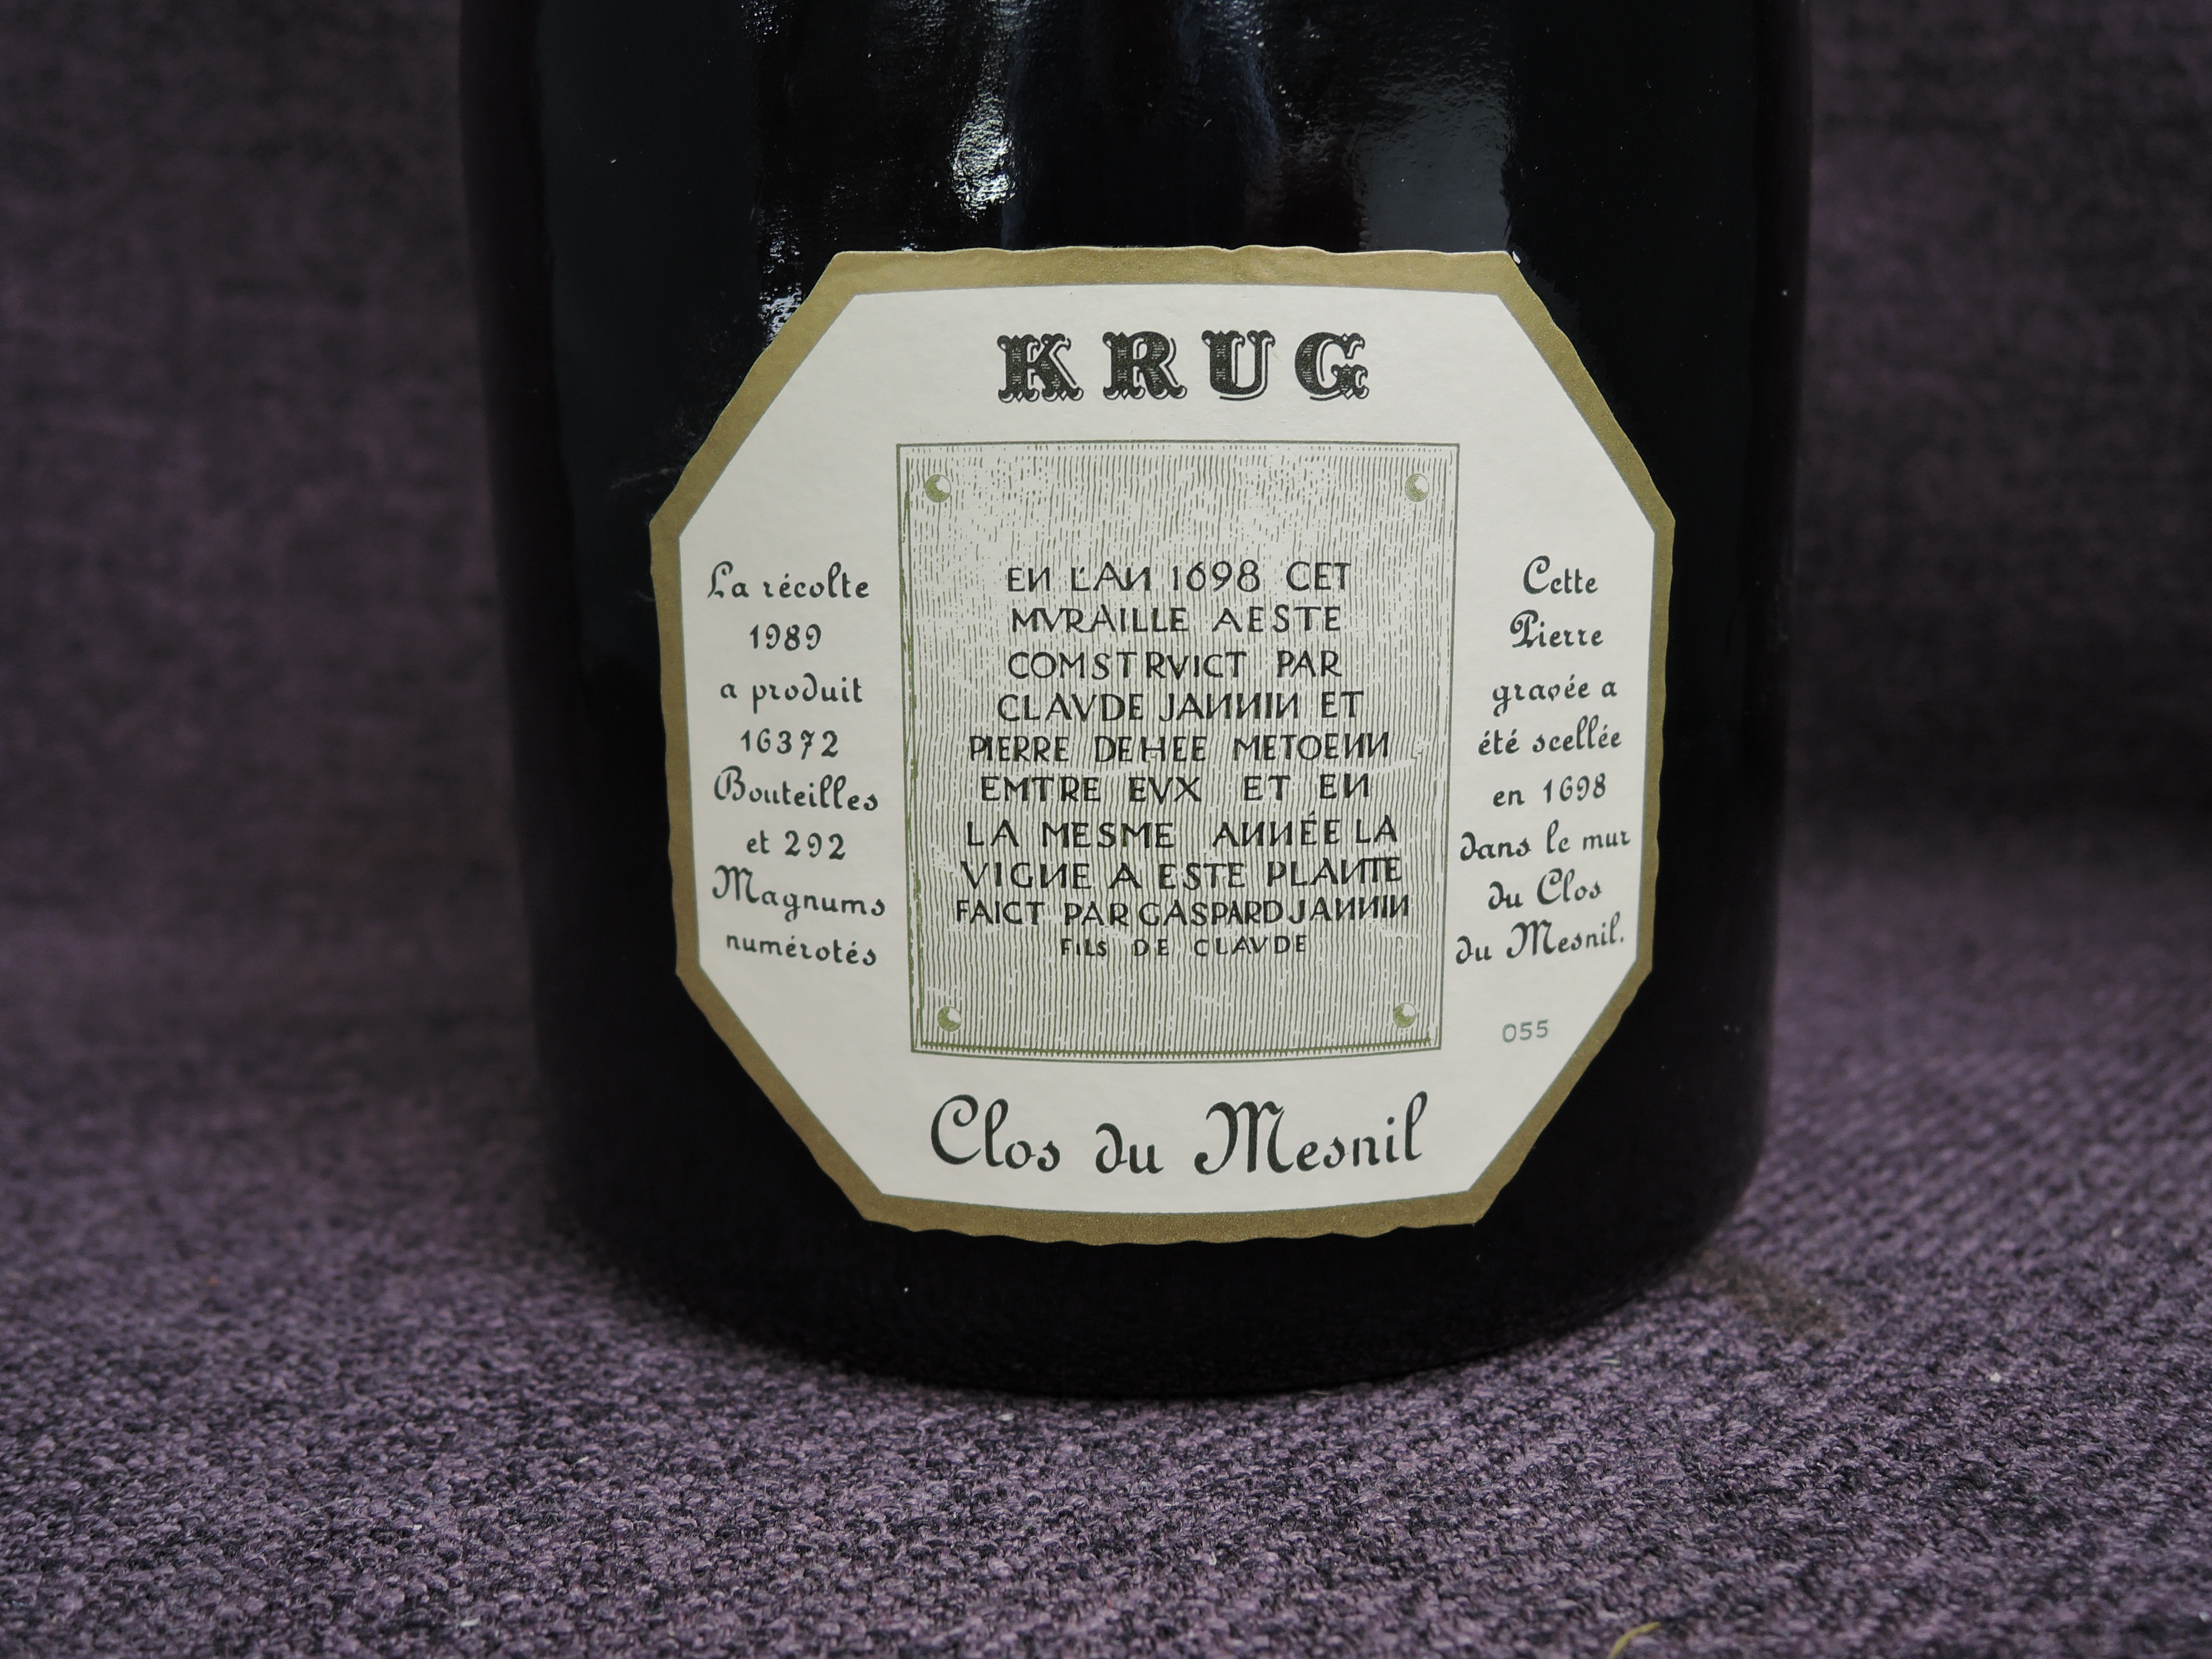 A bottle of Krug Clos Du Mesnil 1989 Champagne, 1698-1998 300 year anniversary, bottle no 07078, 12% - Image 6 of 8